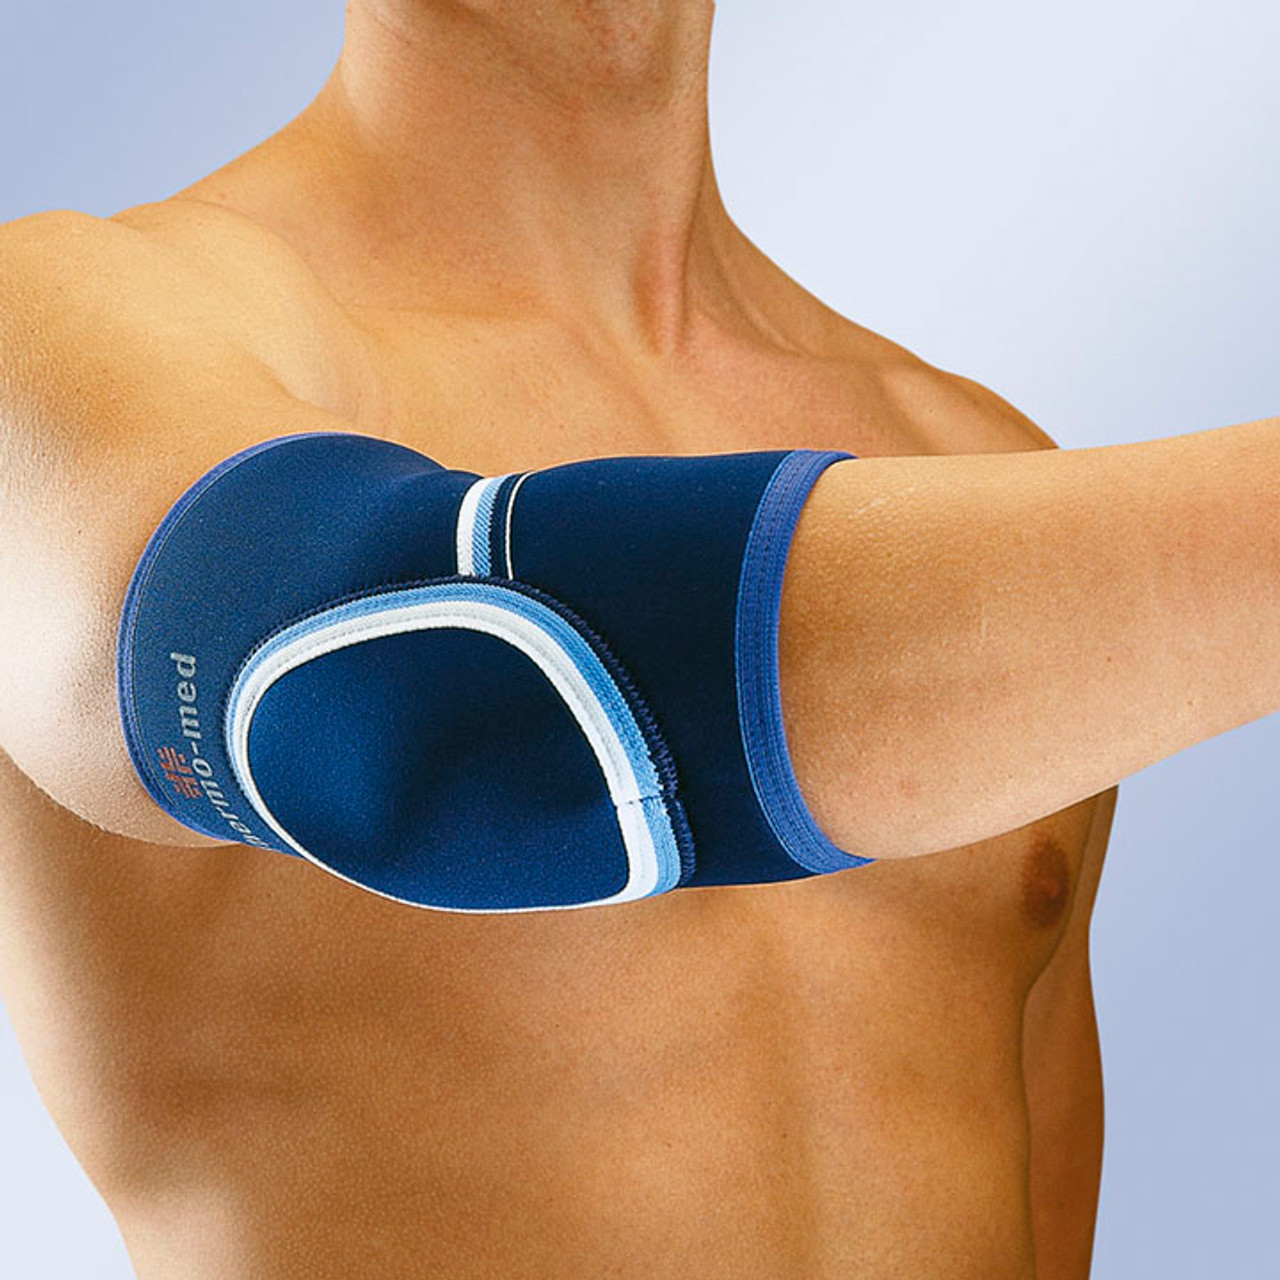 NEOPRENE PADDED ELBOW SUPPORT - MD/3, 4303MD